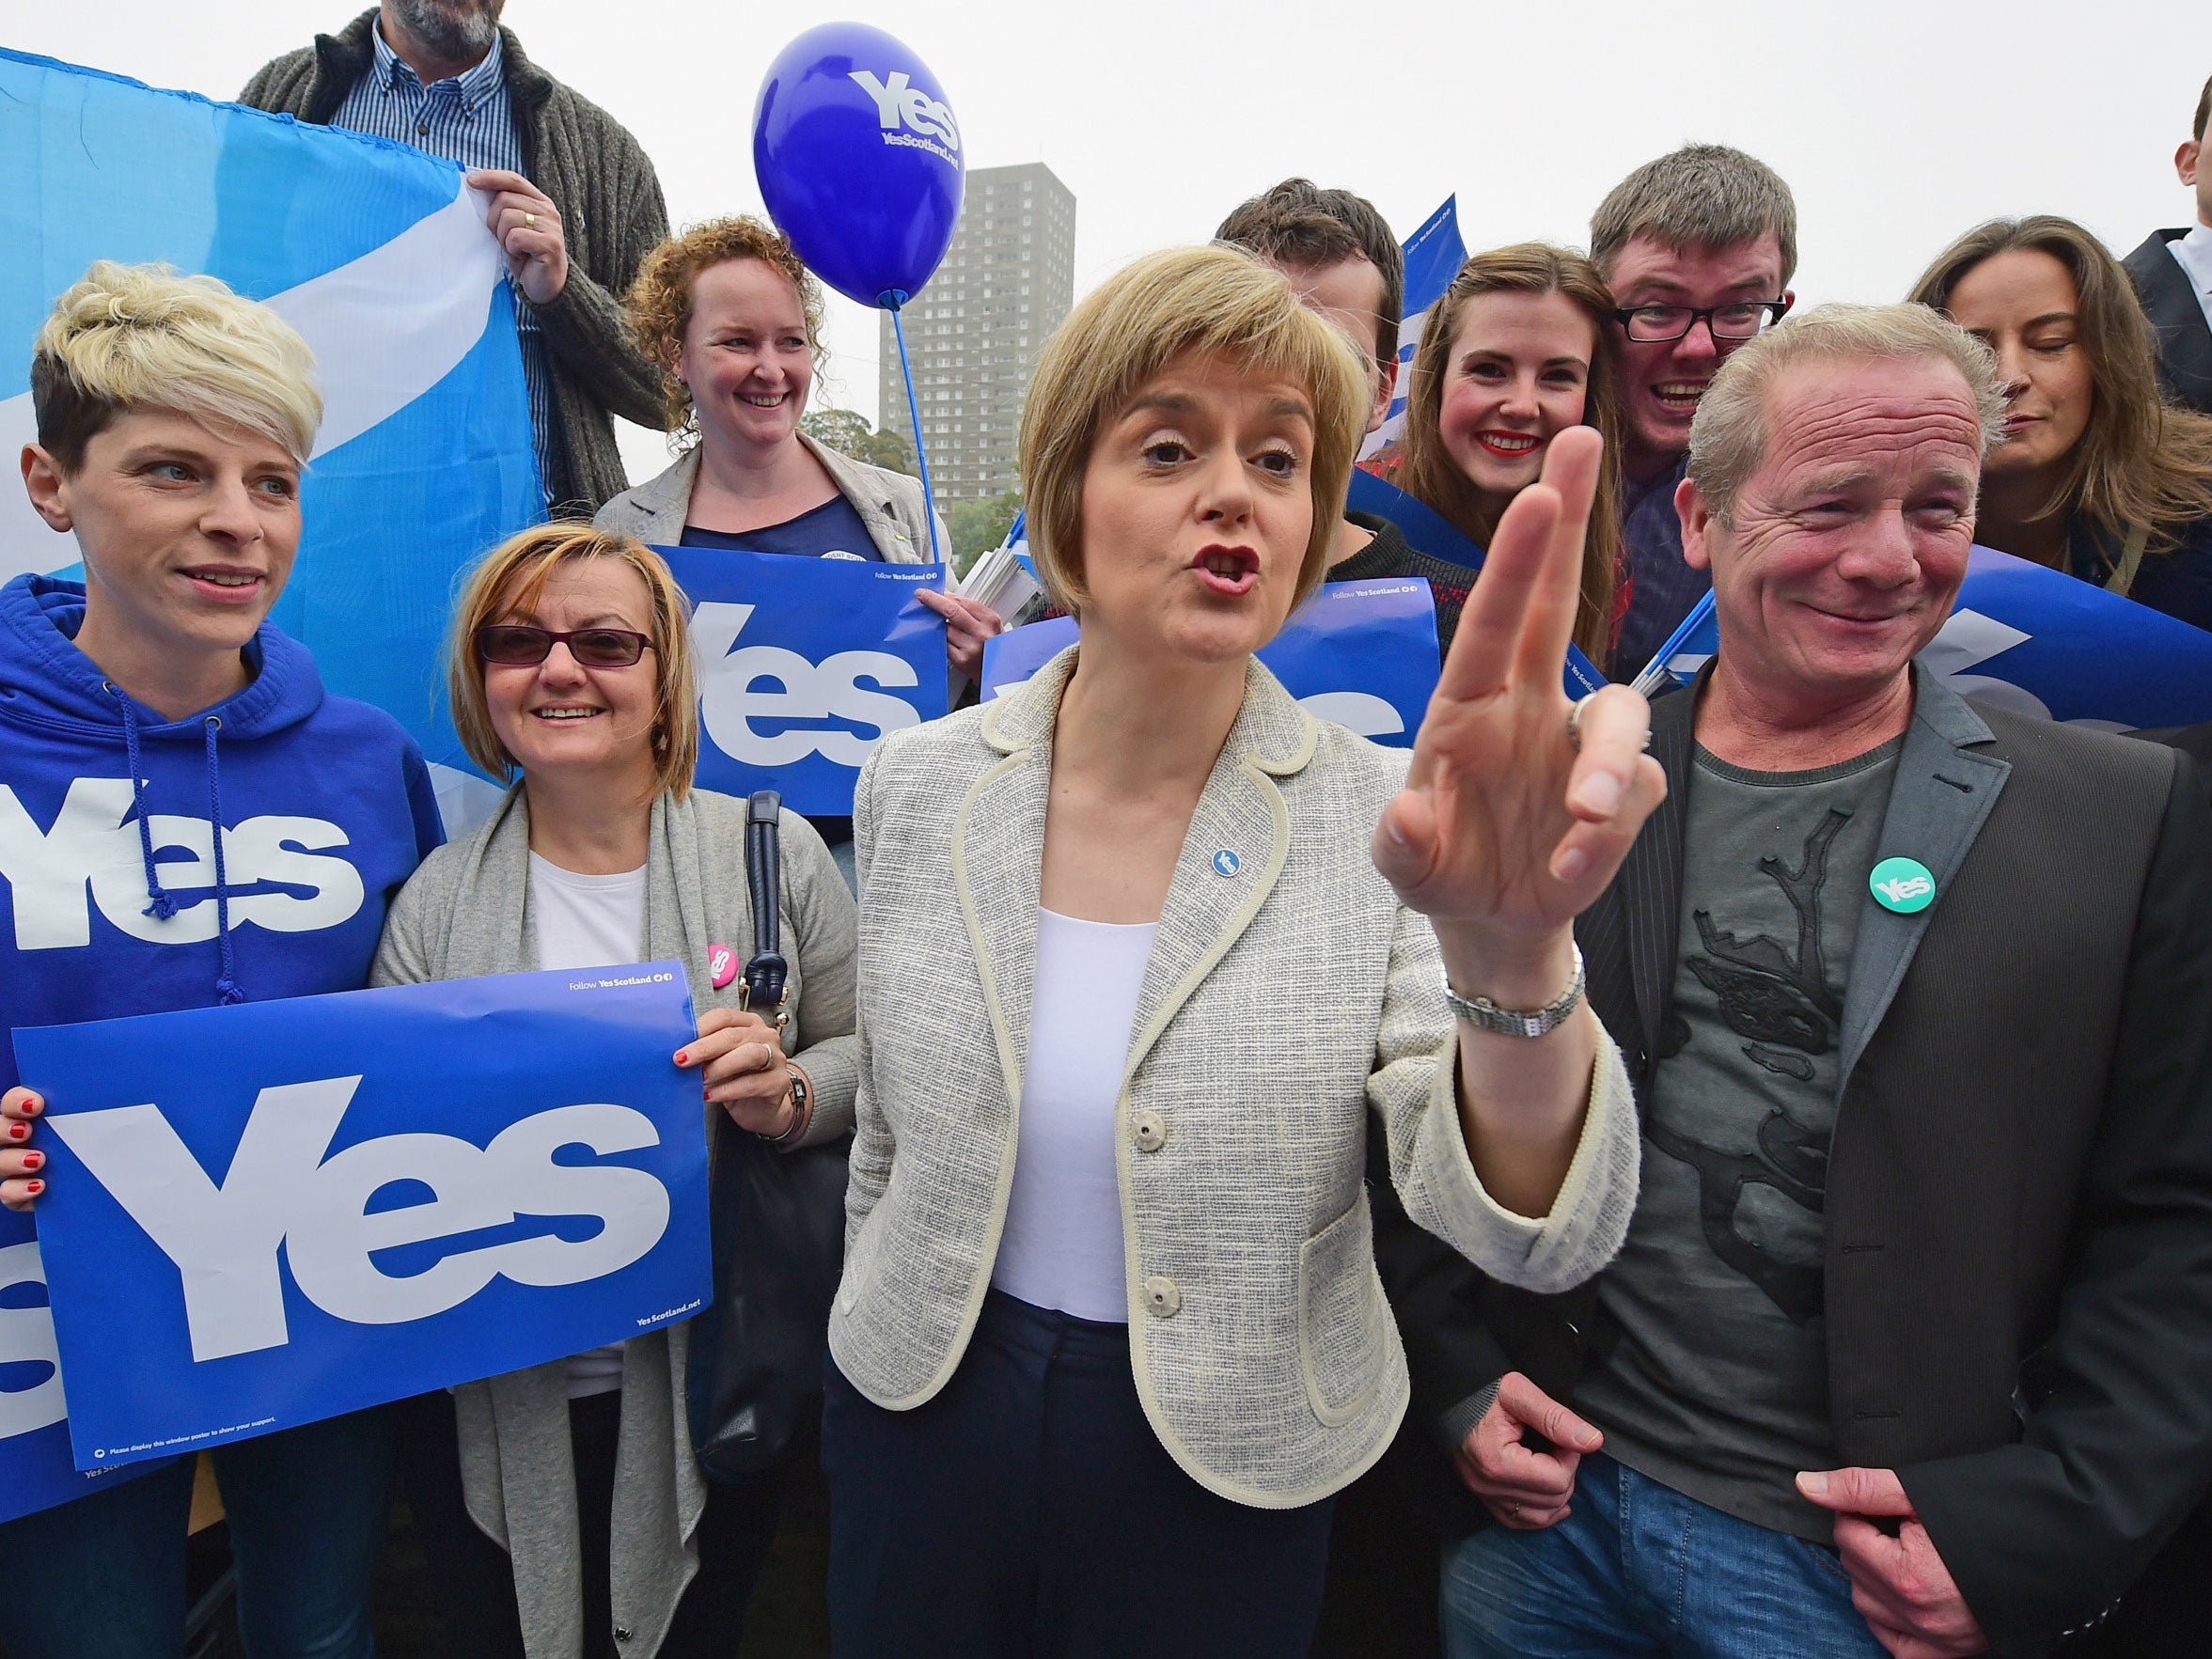 Deputy First Minister Nicola Sturgeon (L) and actor Peter Mullan campaign for the 'Yes' vote in Drumchapel on September 12,2014 in Glasgow, Scotland.